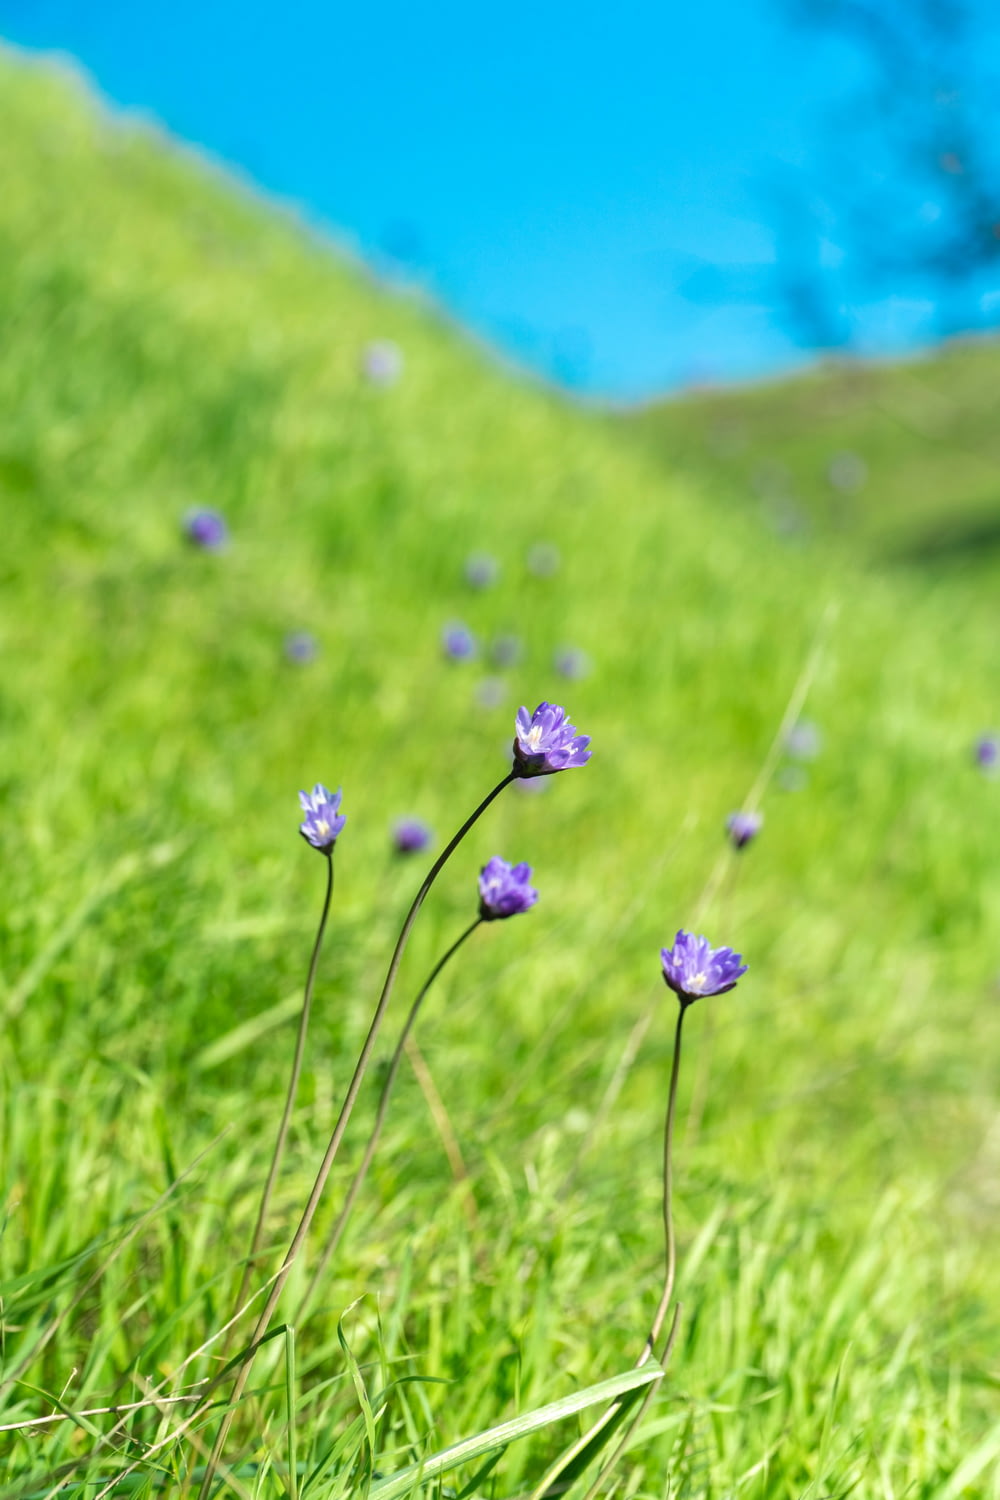 purple flowers in a grassy field with a blue sky in the background